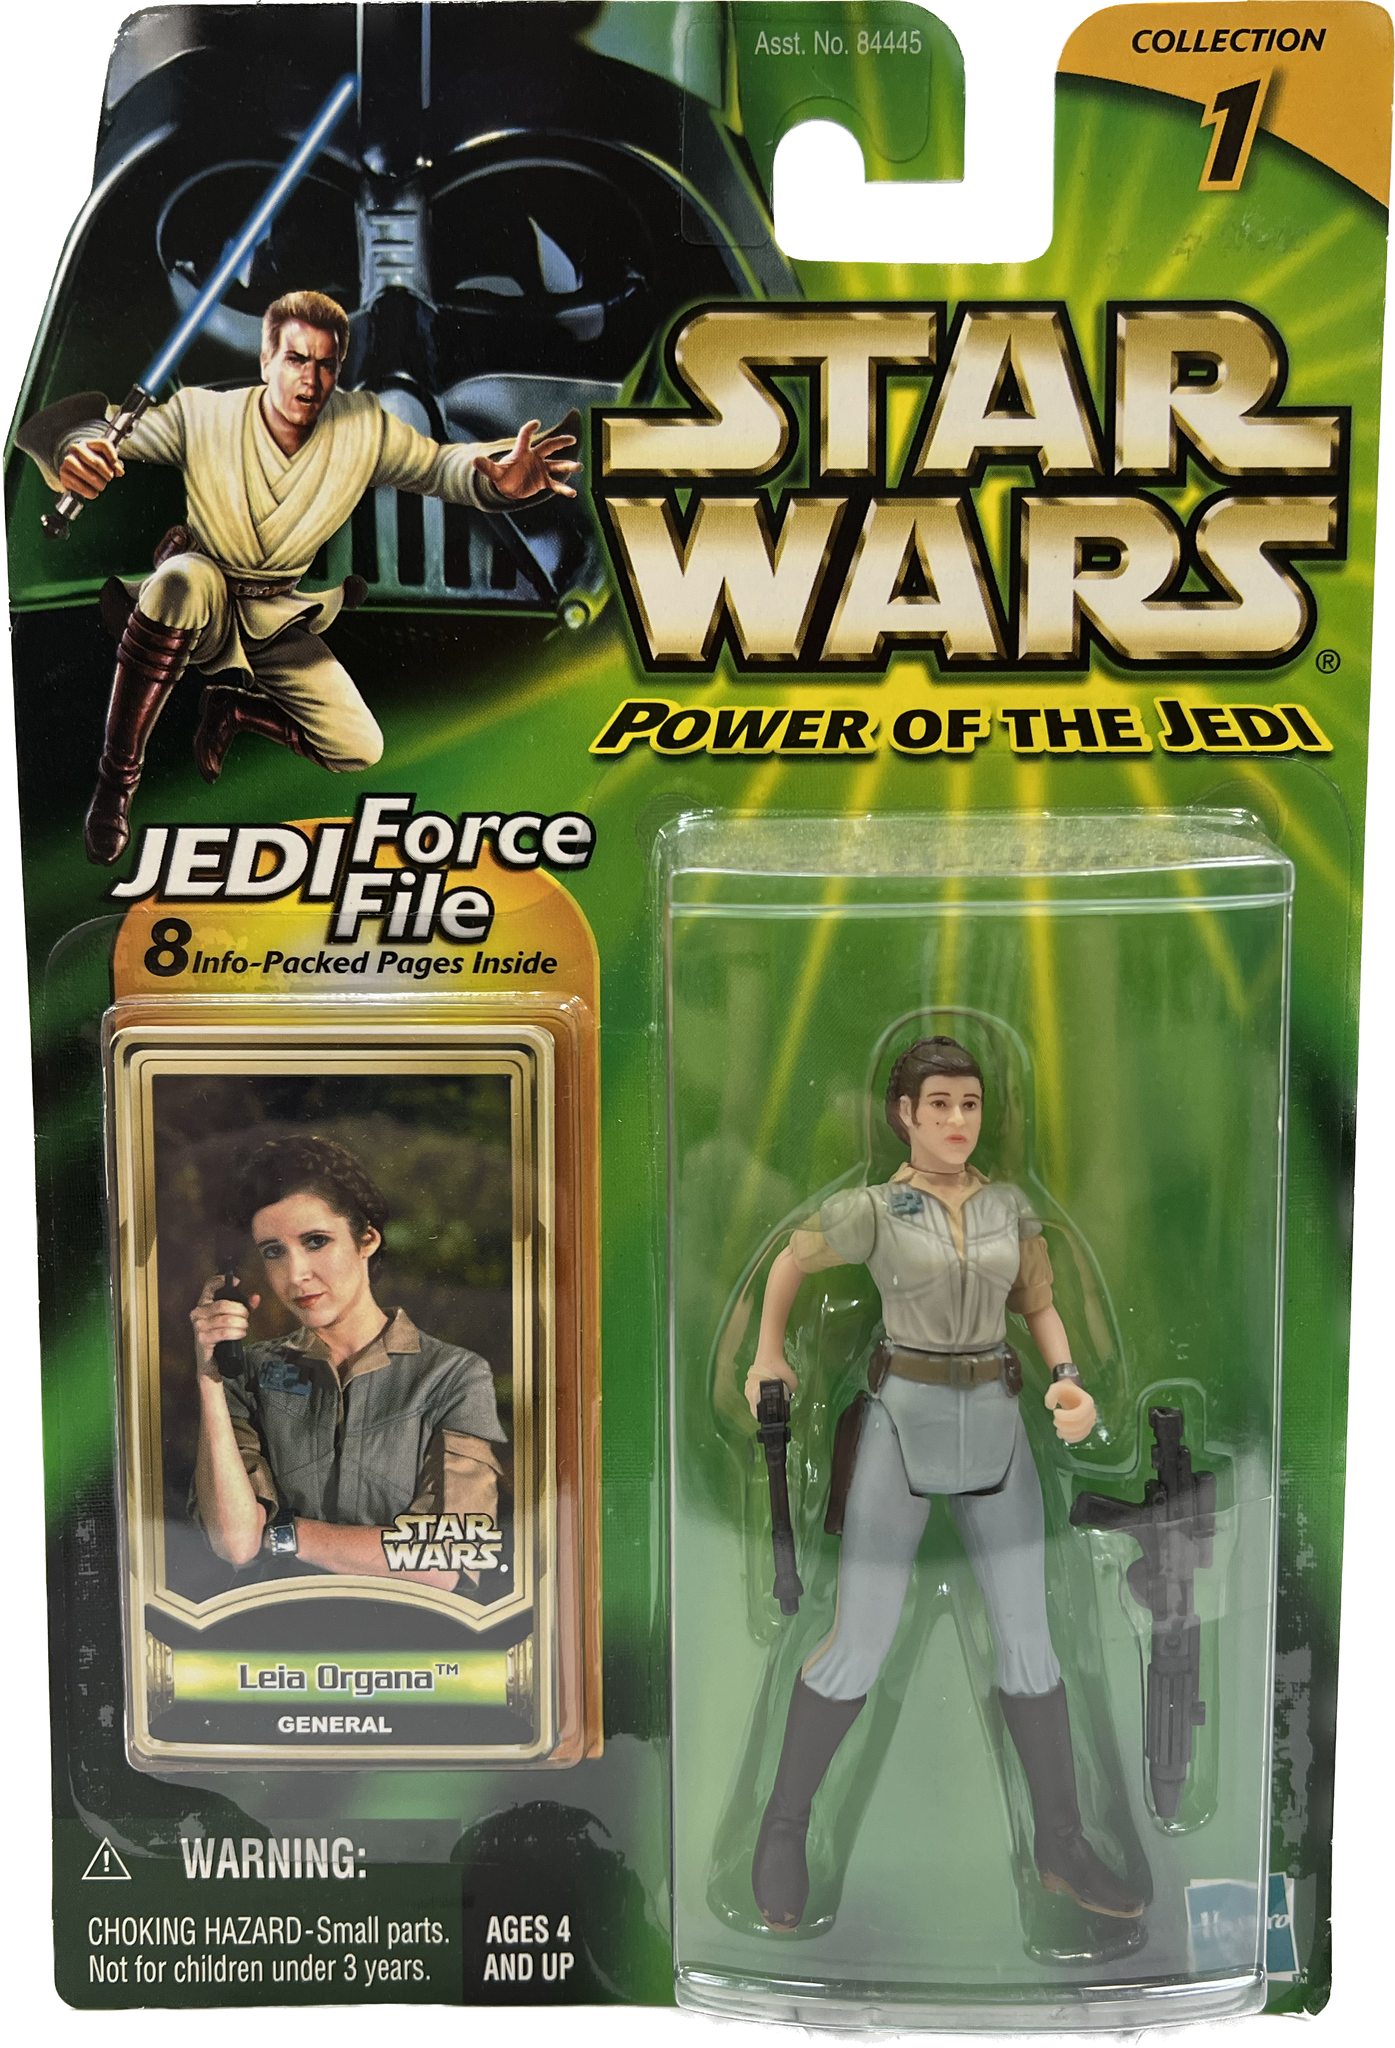 Star Wars Power of the Jedi Collection 1 Leia Organa